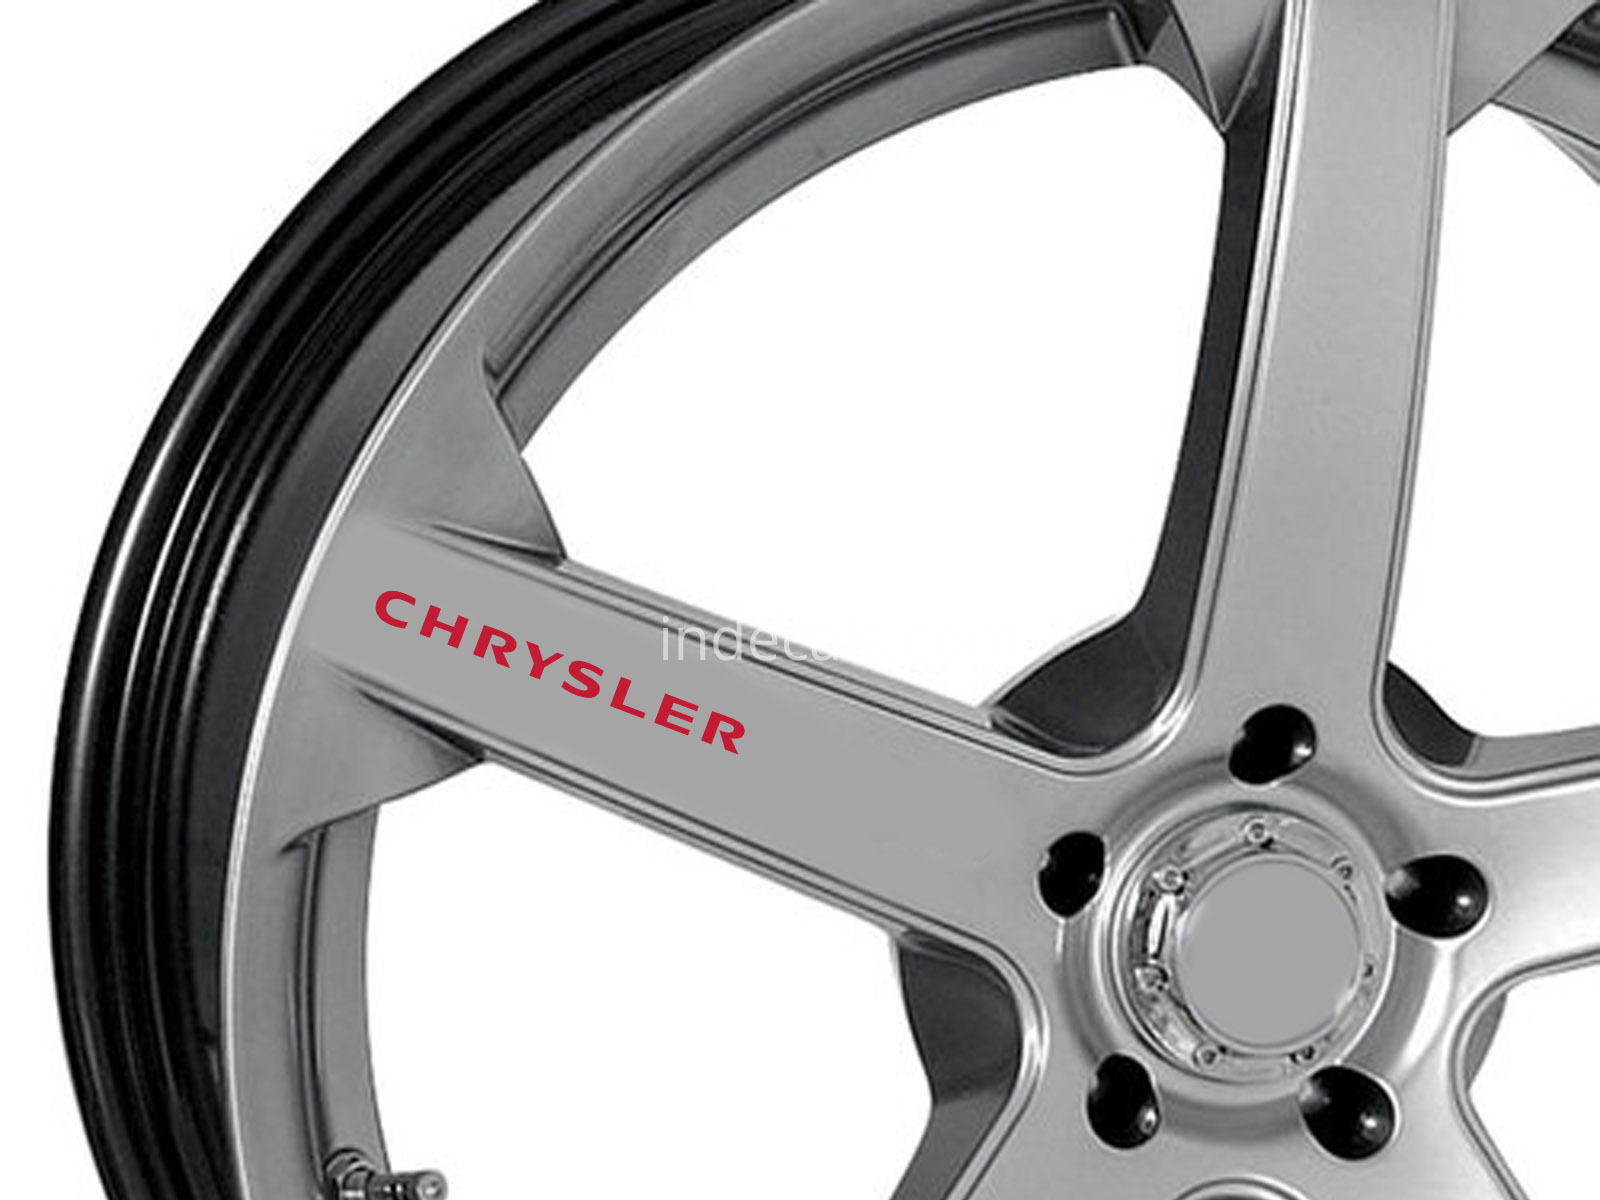 6 x Chrysler Stickers for Wheels - Red